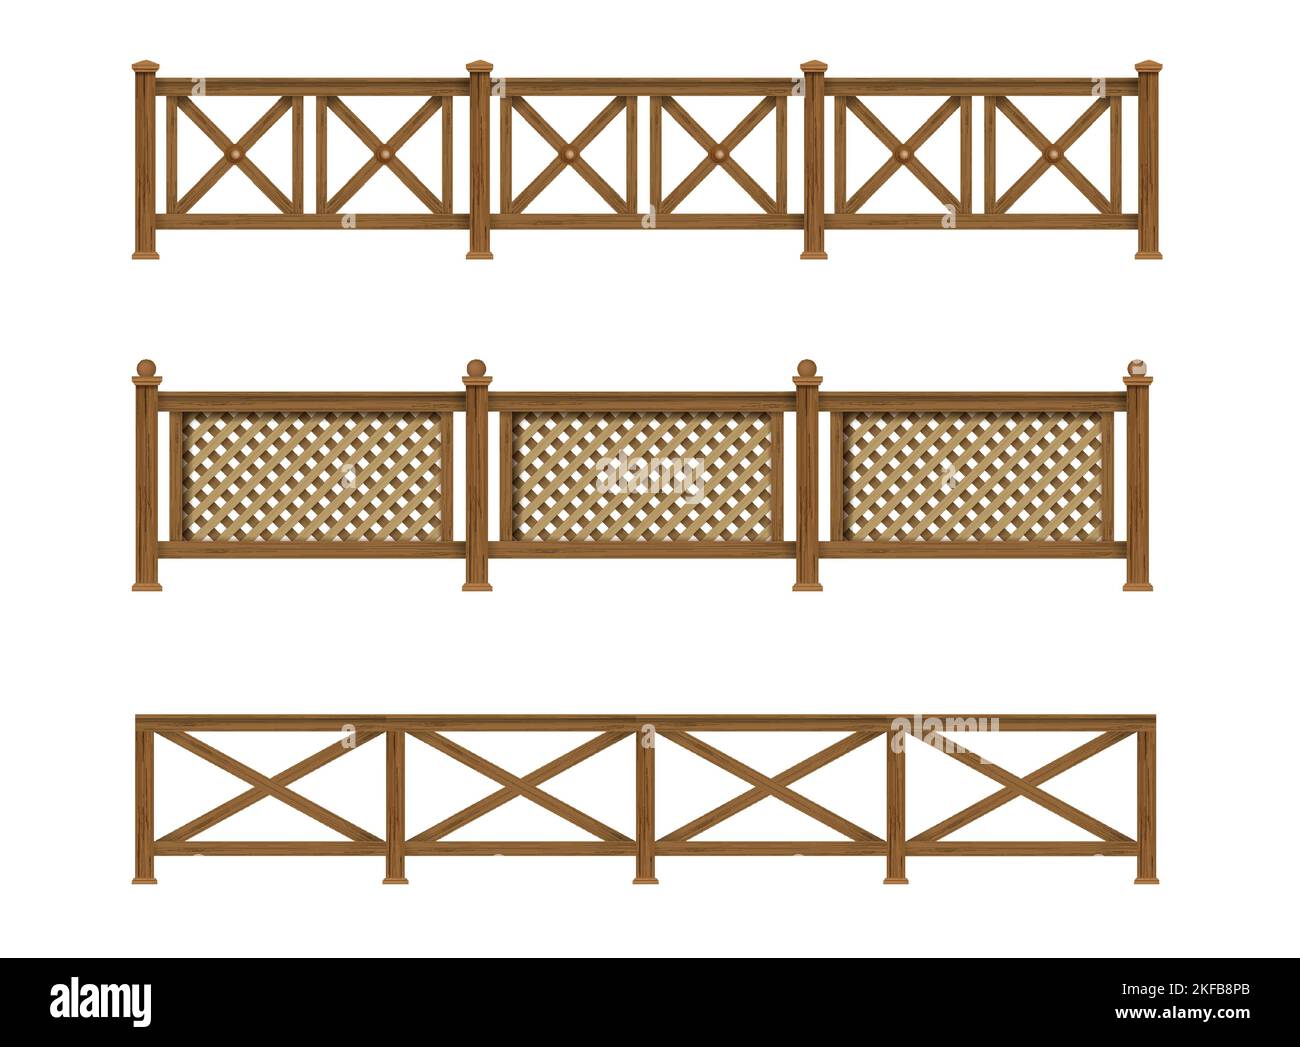 Set of vintage wooden fences made of wood Stock Vector